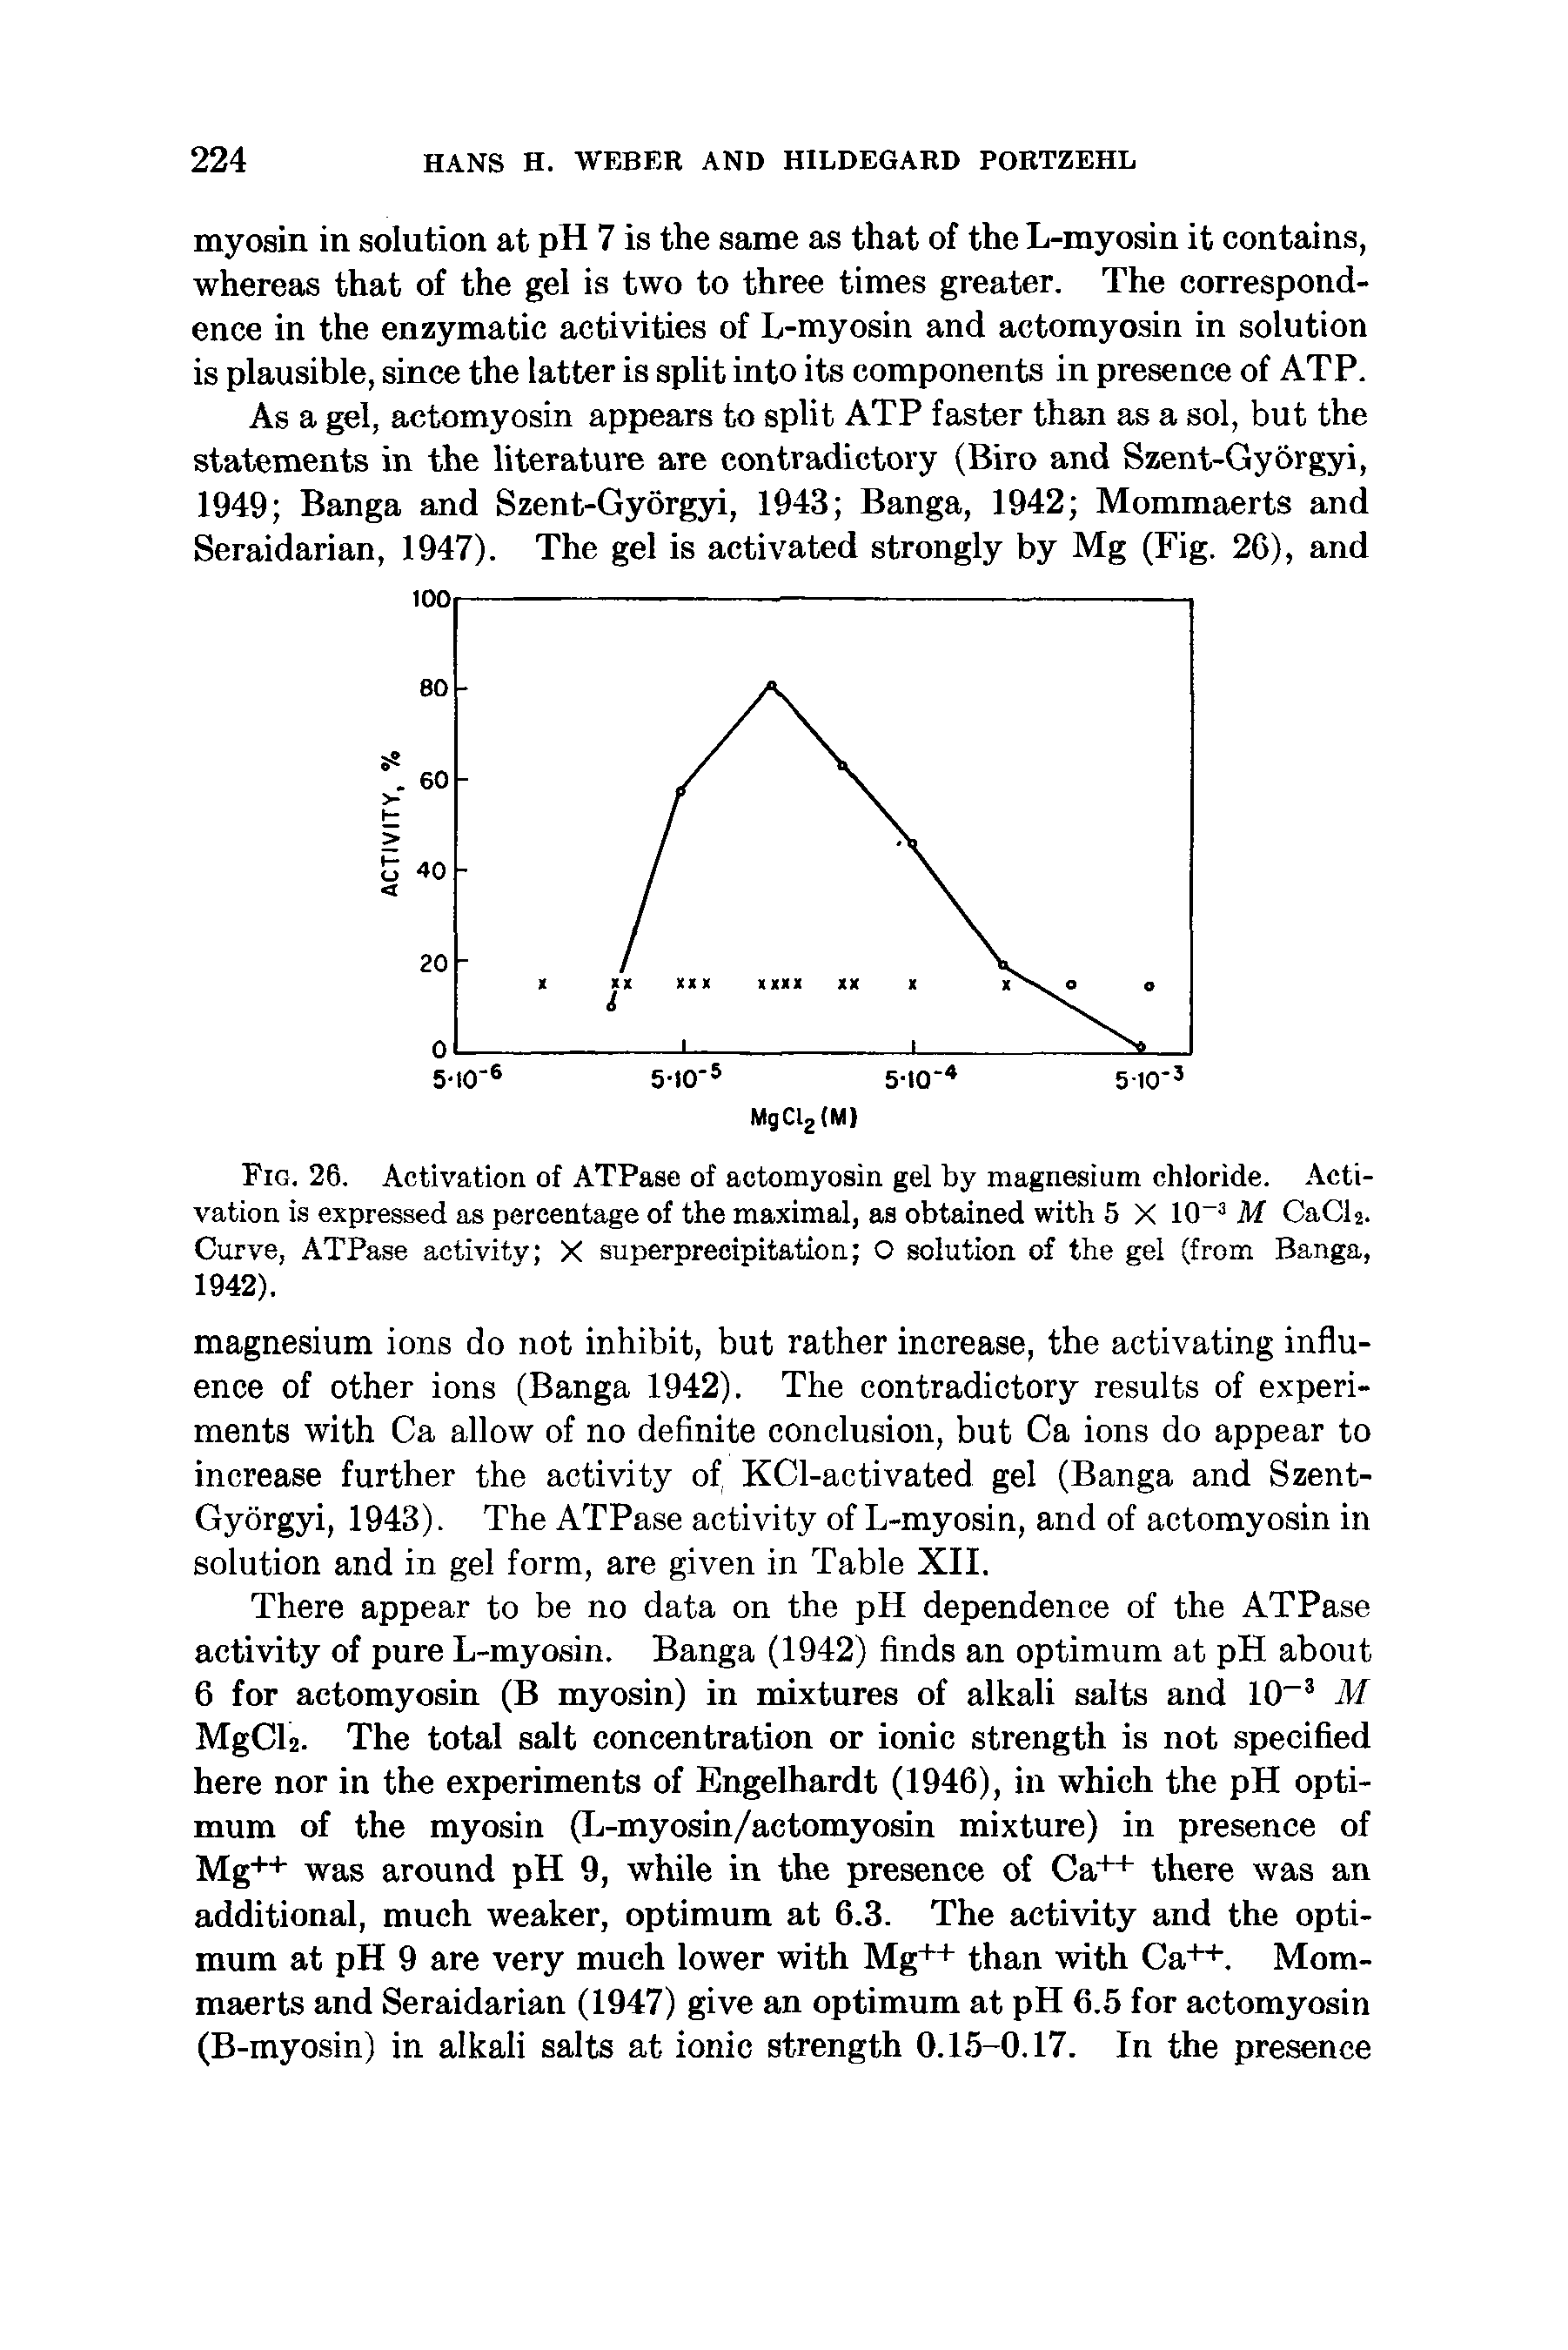 Fig. 26. Activation of ATPase of actomyosin gel by magnesium chloride. Activation is expressed as percentage of the maximal, as obtained with 5 X 10 M CaCL. Curve, ATPase activity X superpreoipitation O solution of the gel (from Banga, 1942).